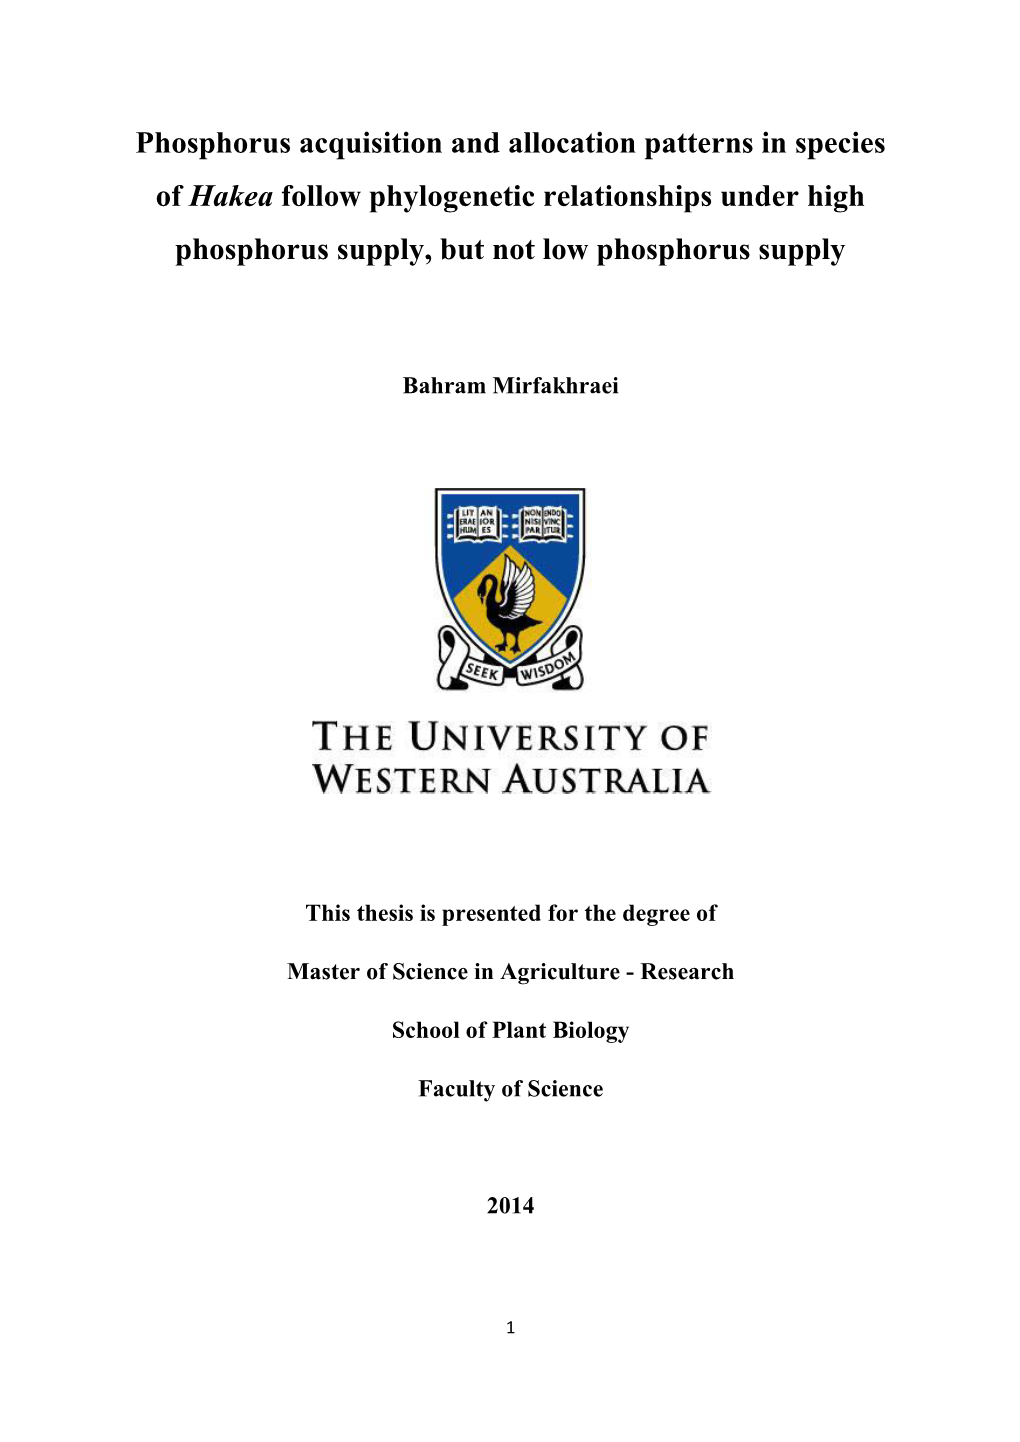 Phosphorus Acquisition and Allocation Patterns in Species of Hakea Follow Phylogenetic Relationships Under High Phosphorus Supply, but Not Low Phosphorus Supply